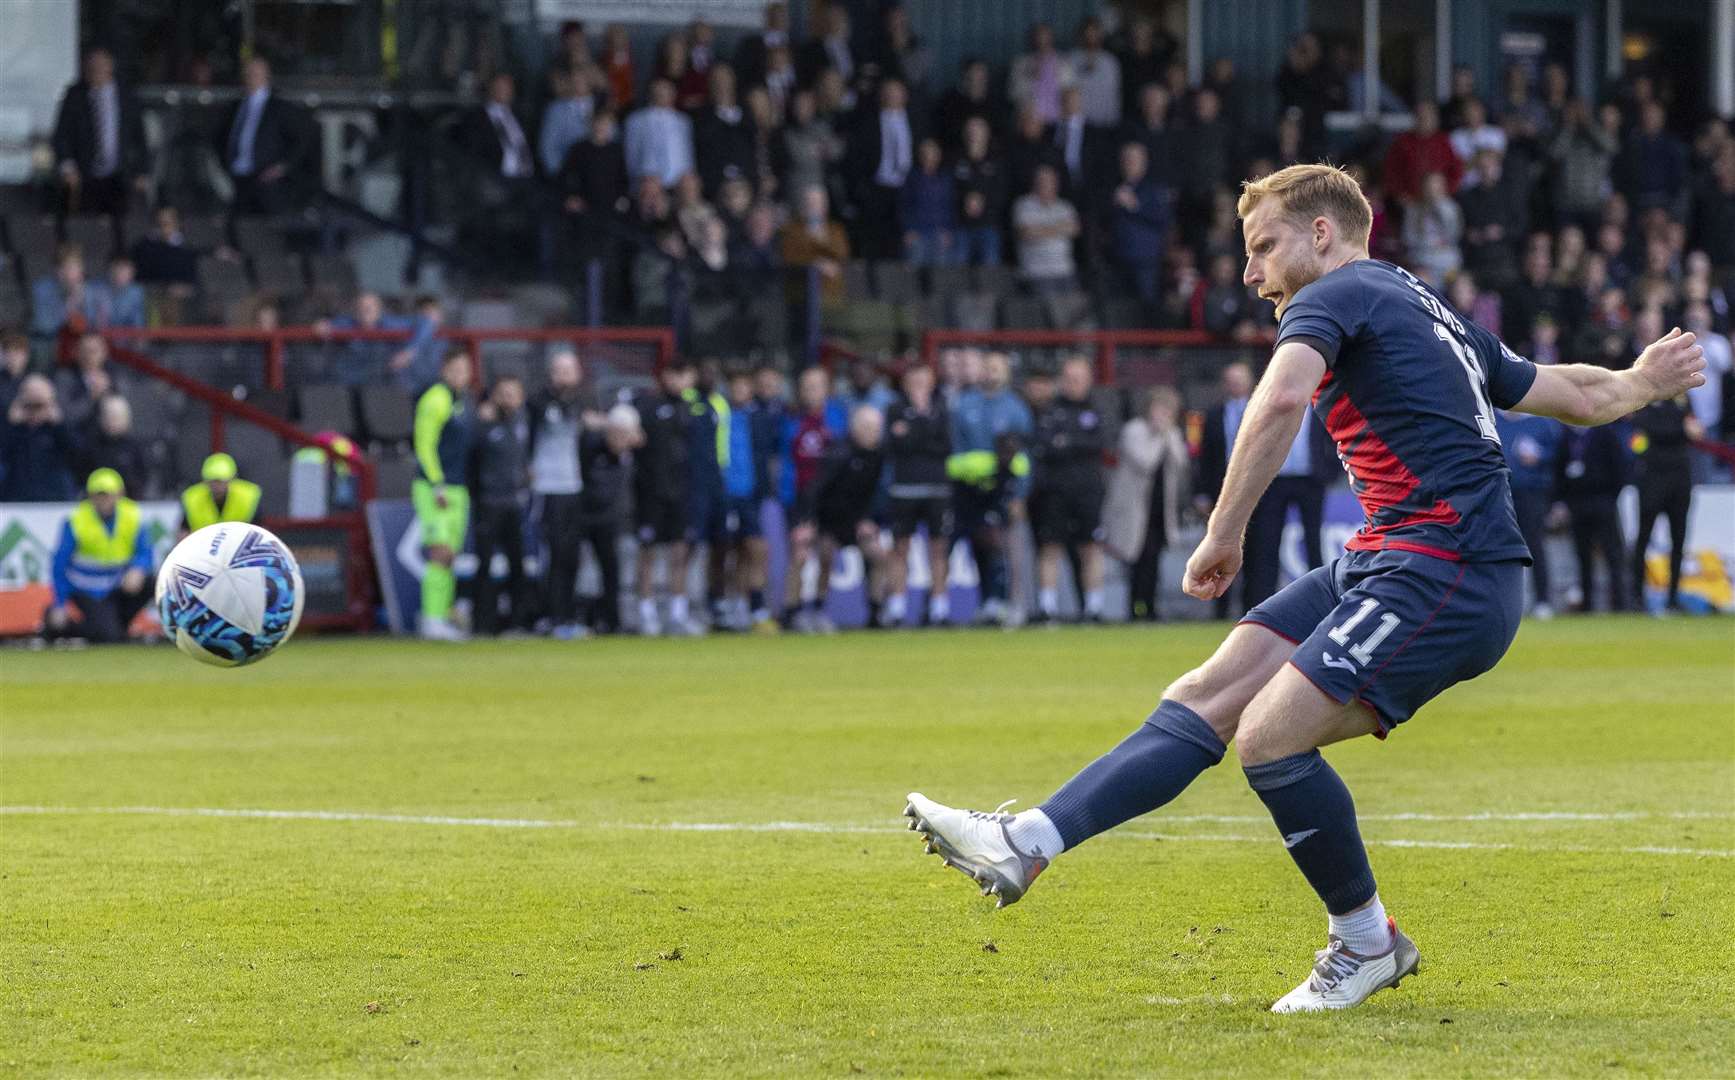 Josh Sims scored the decisive penalty in last season's play-off final – but he will hope spot kicks aren't needed when the two sides meet again in this season's Scottish Cup. Picture: Ken Macpherson